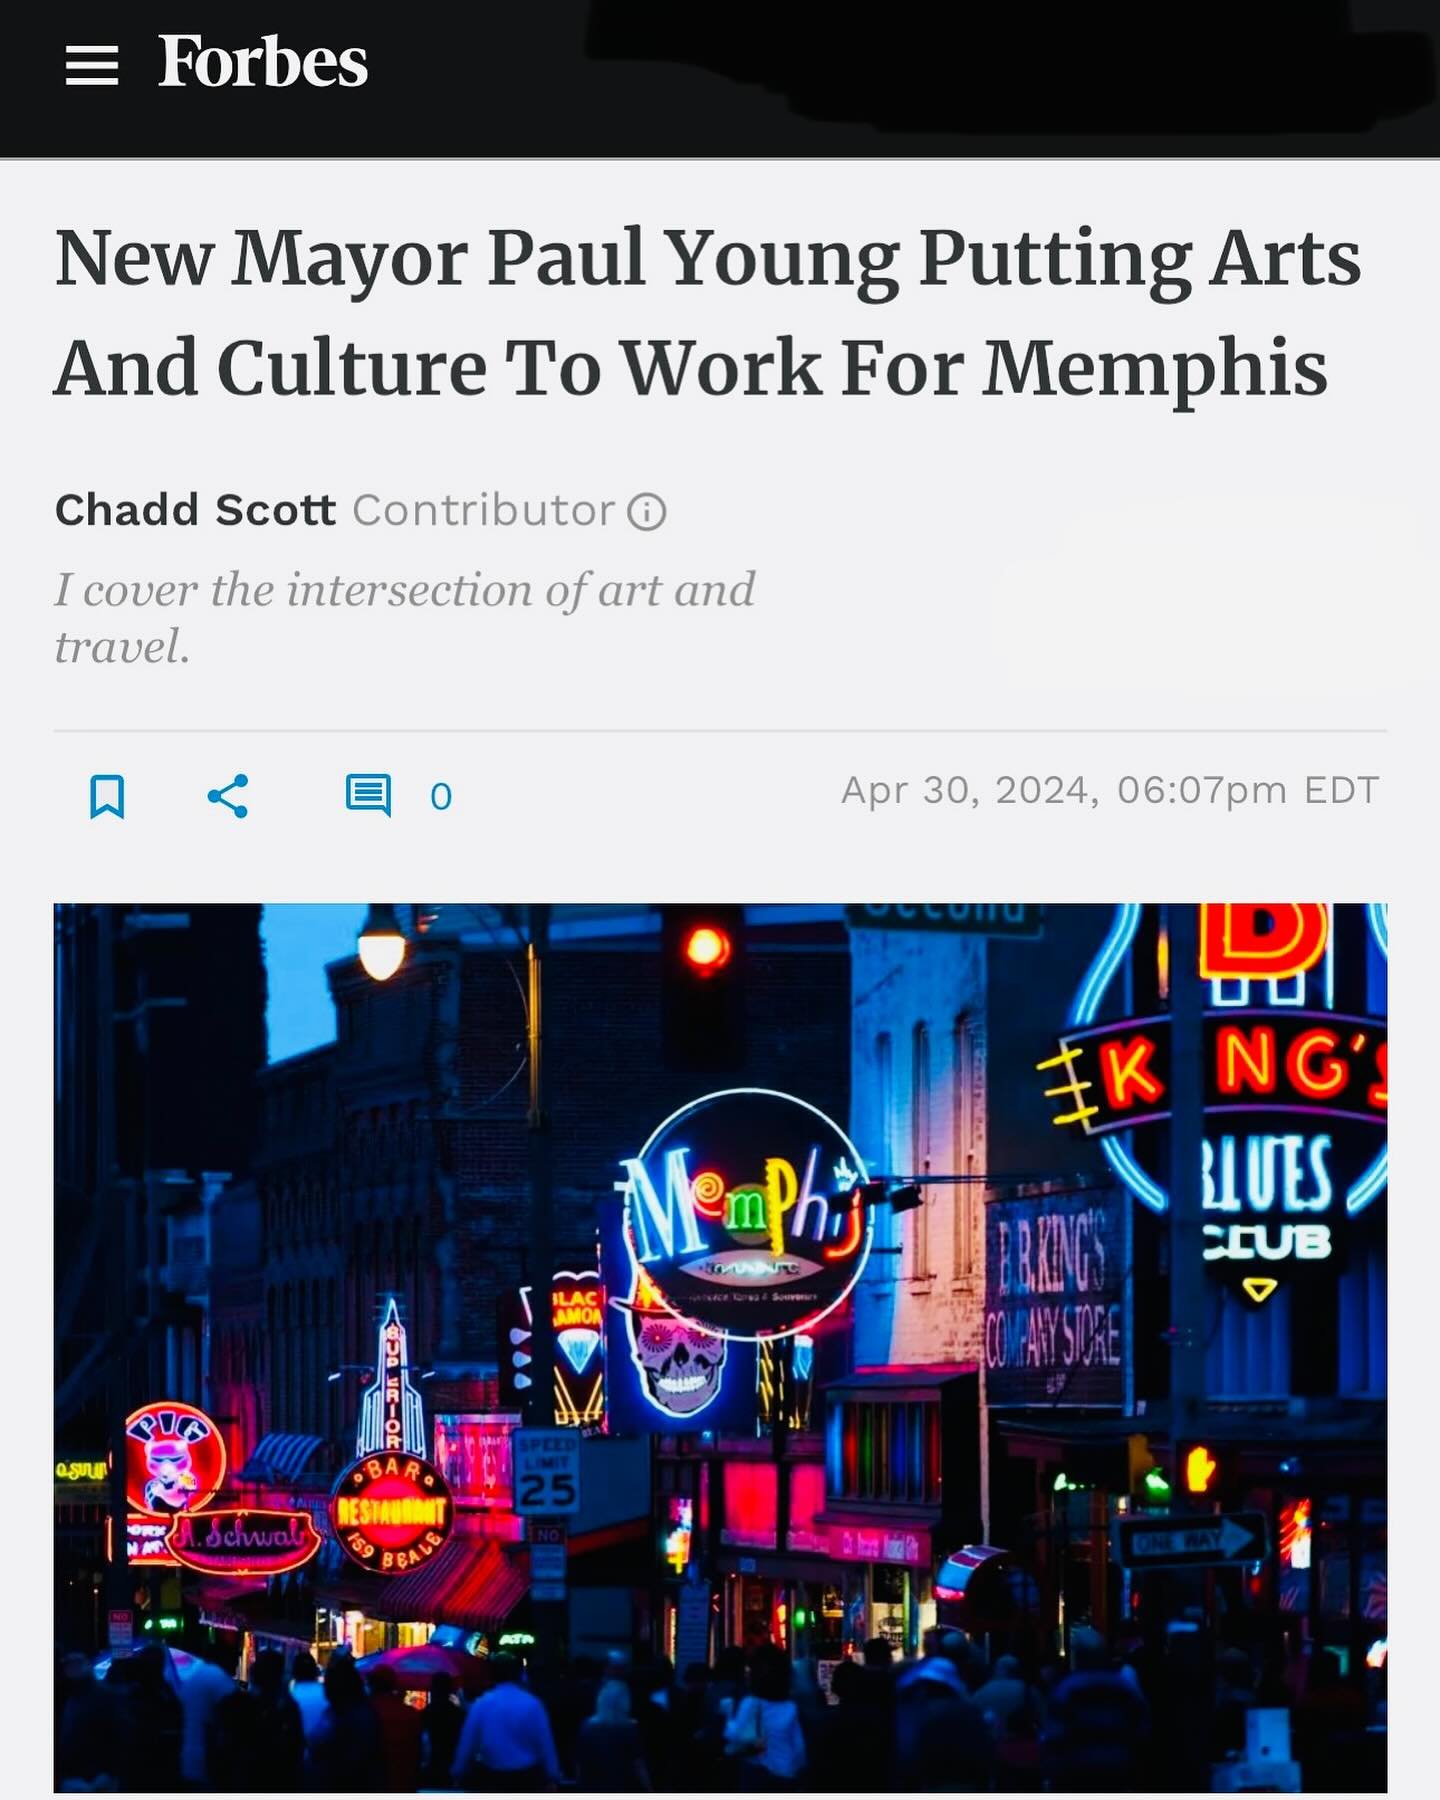 &ldquo;As cities are competing in this next chapter of economic growth&hellip; it&rsquo;s going to be about quality of life,&rdquo; says Mayor Paul Young. At The UrbanArt Commission (UAC), we wholeheartedly embrace this vision. Our dedication to enha